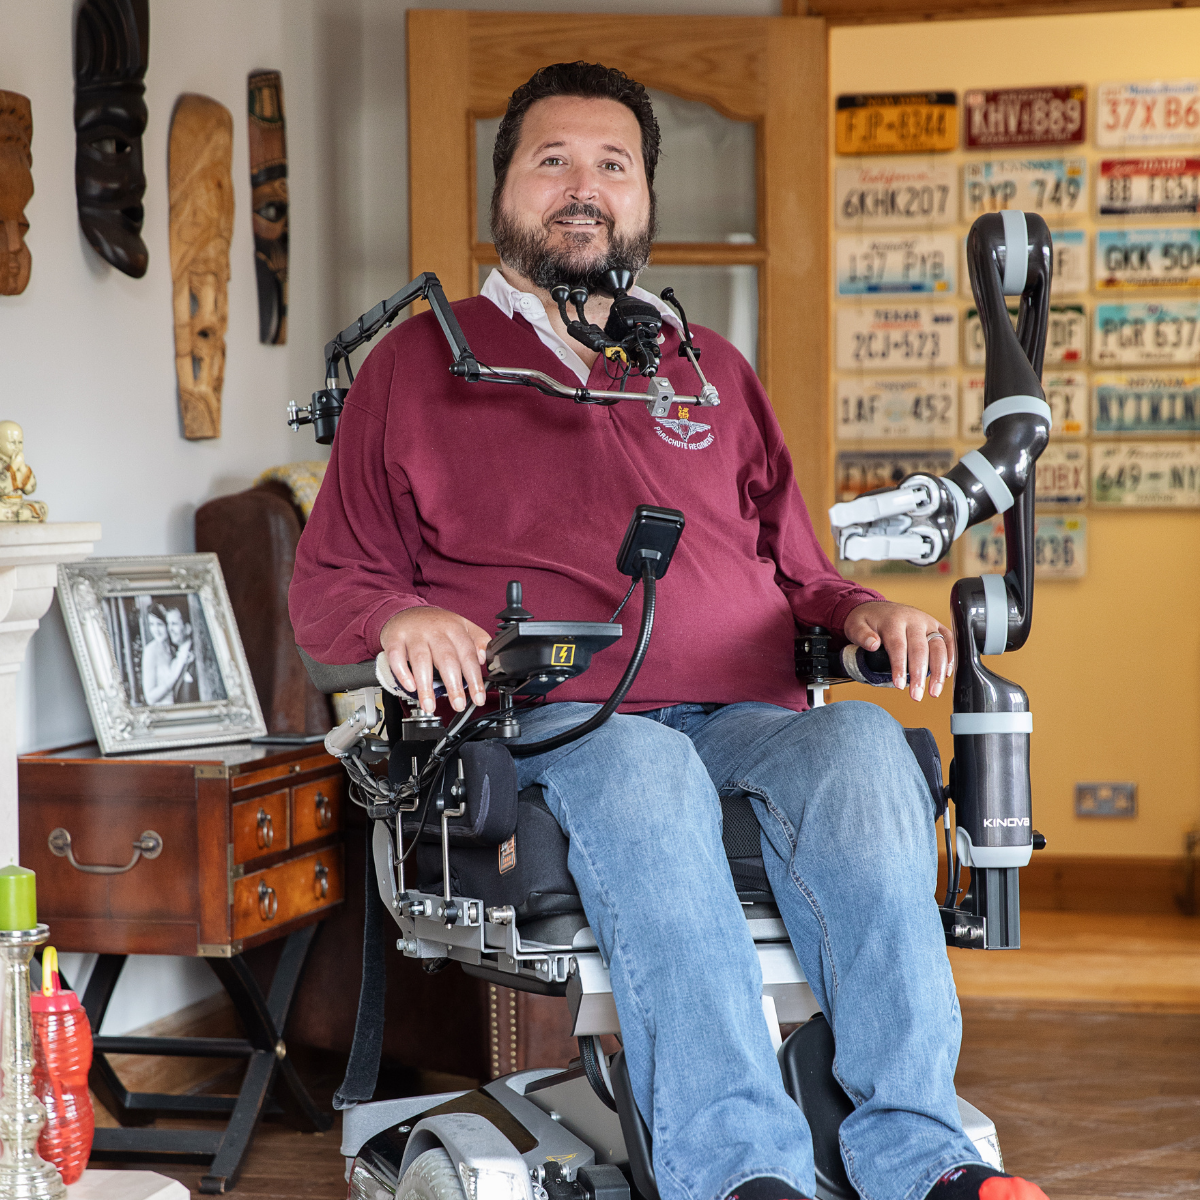 Jon is back in control with his assistive robotic arm…